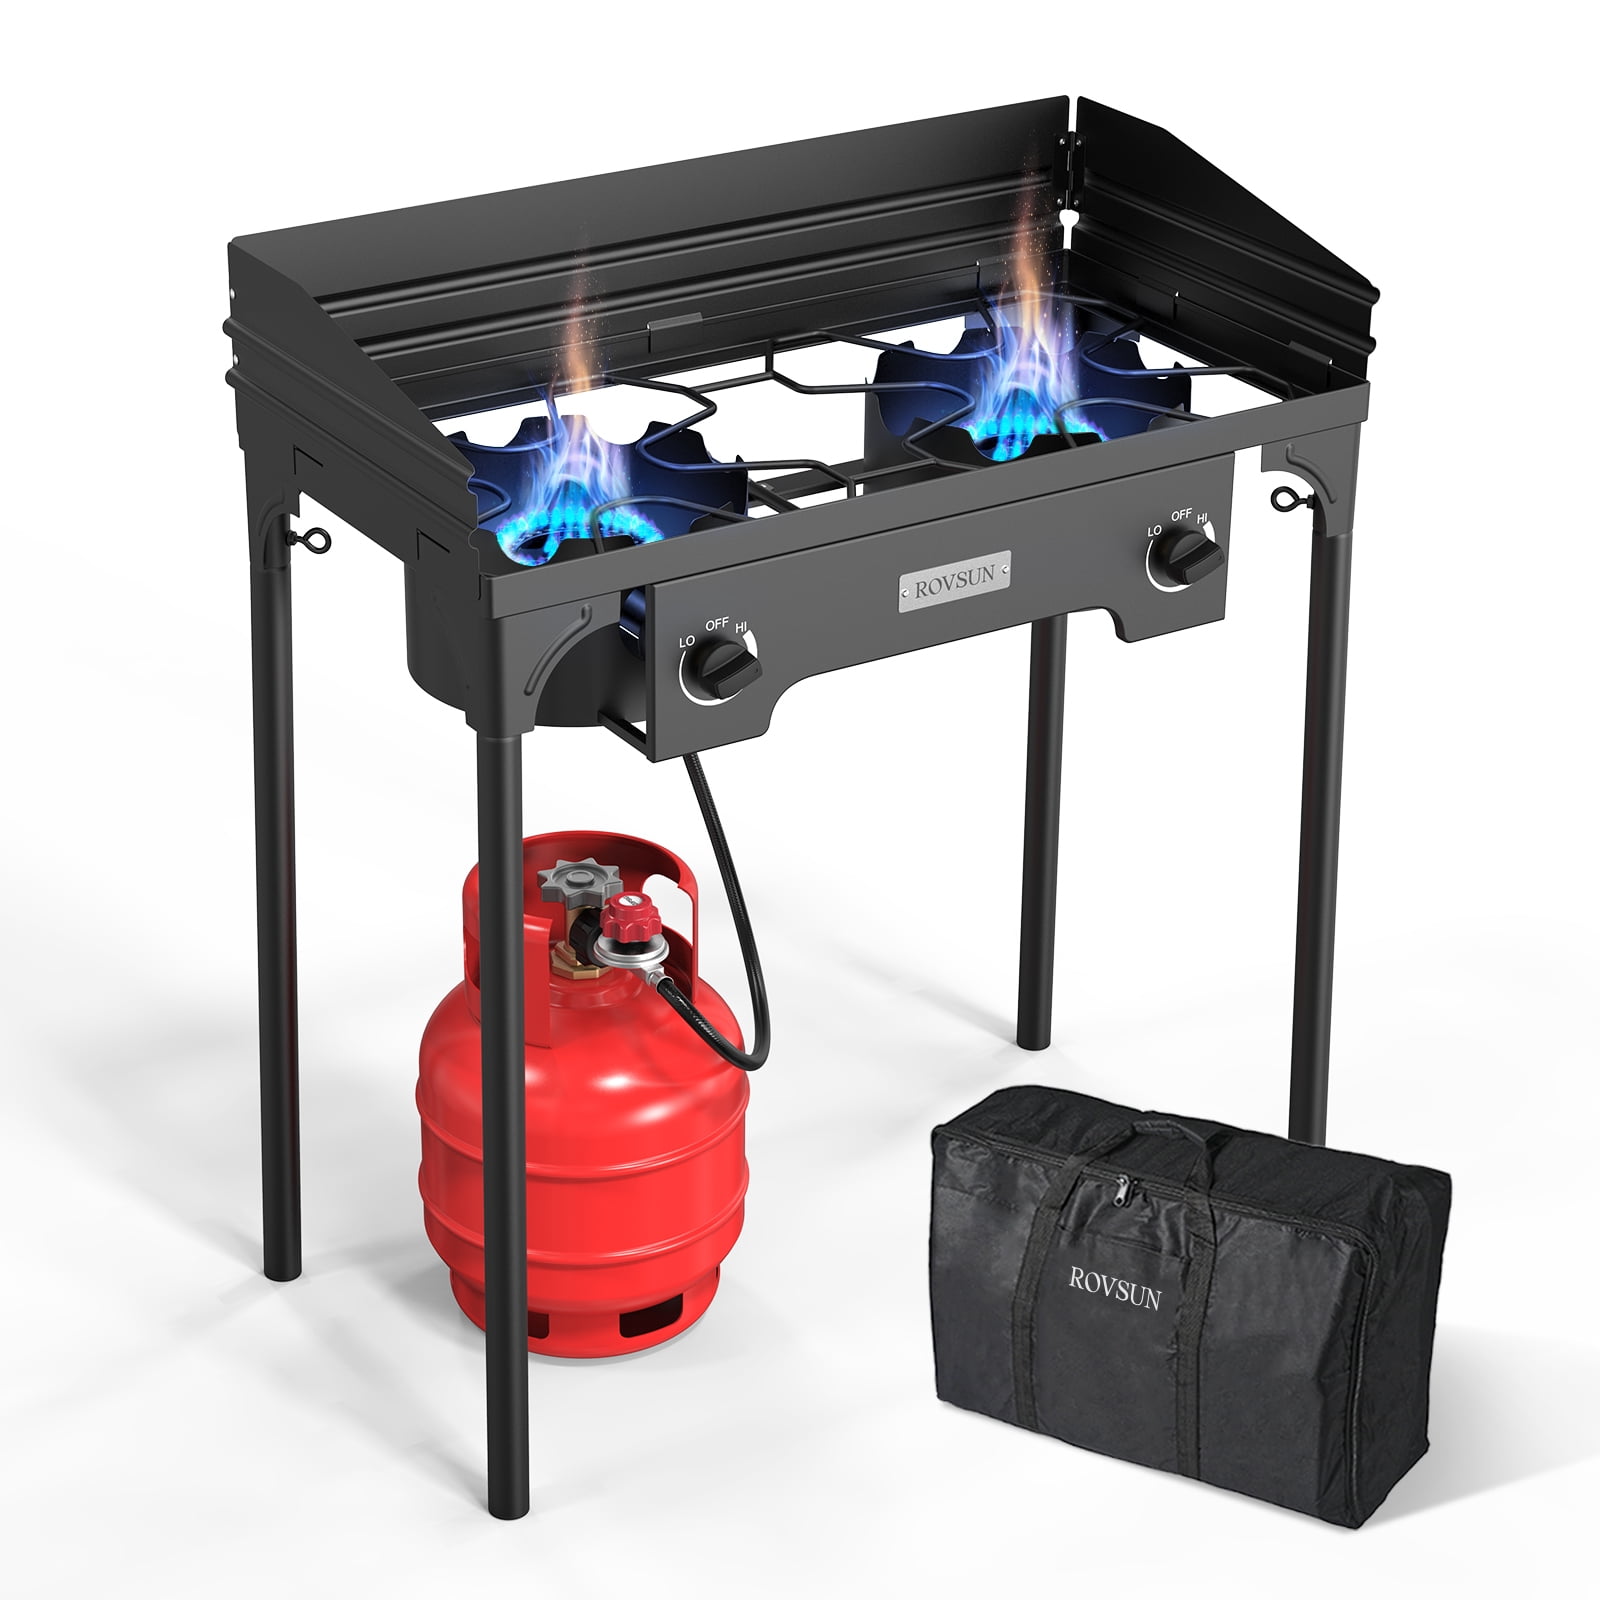  Portable Butane Stove 15000BTU Single Burner for Camping  Cooking in Outdoor,Ultra-high Fire Double-Layer Windbreaker Brass Burner  with Carrying Case : Sports & Outdoors